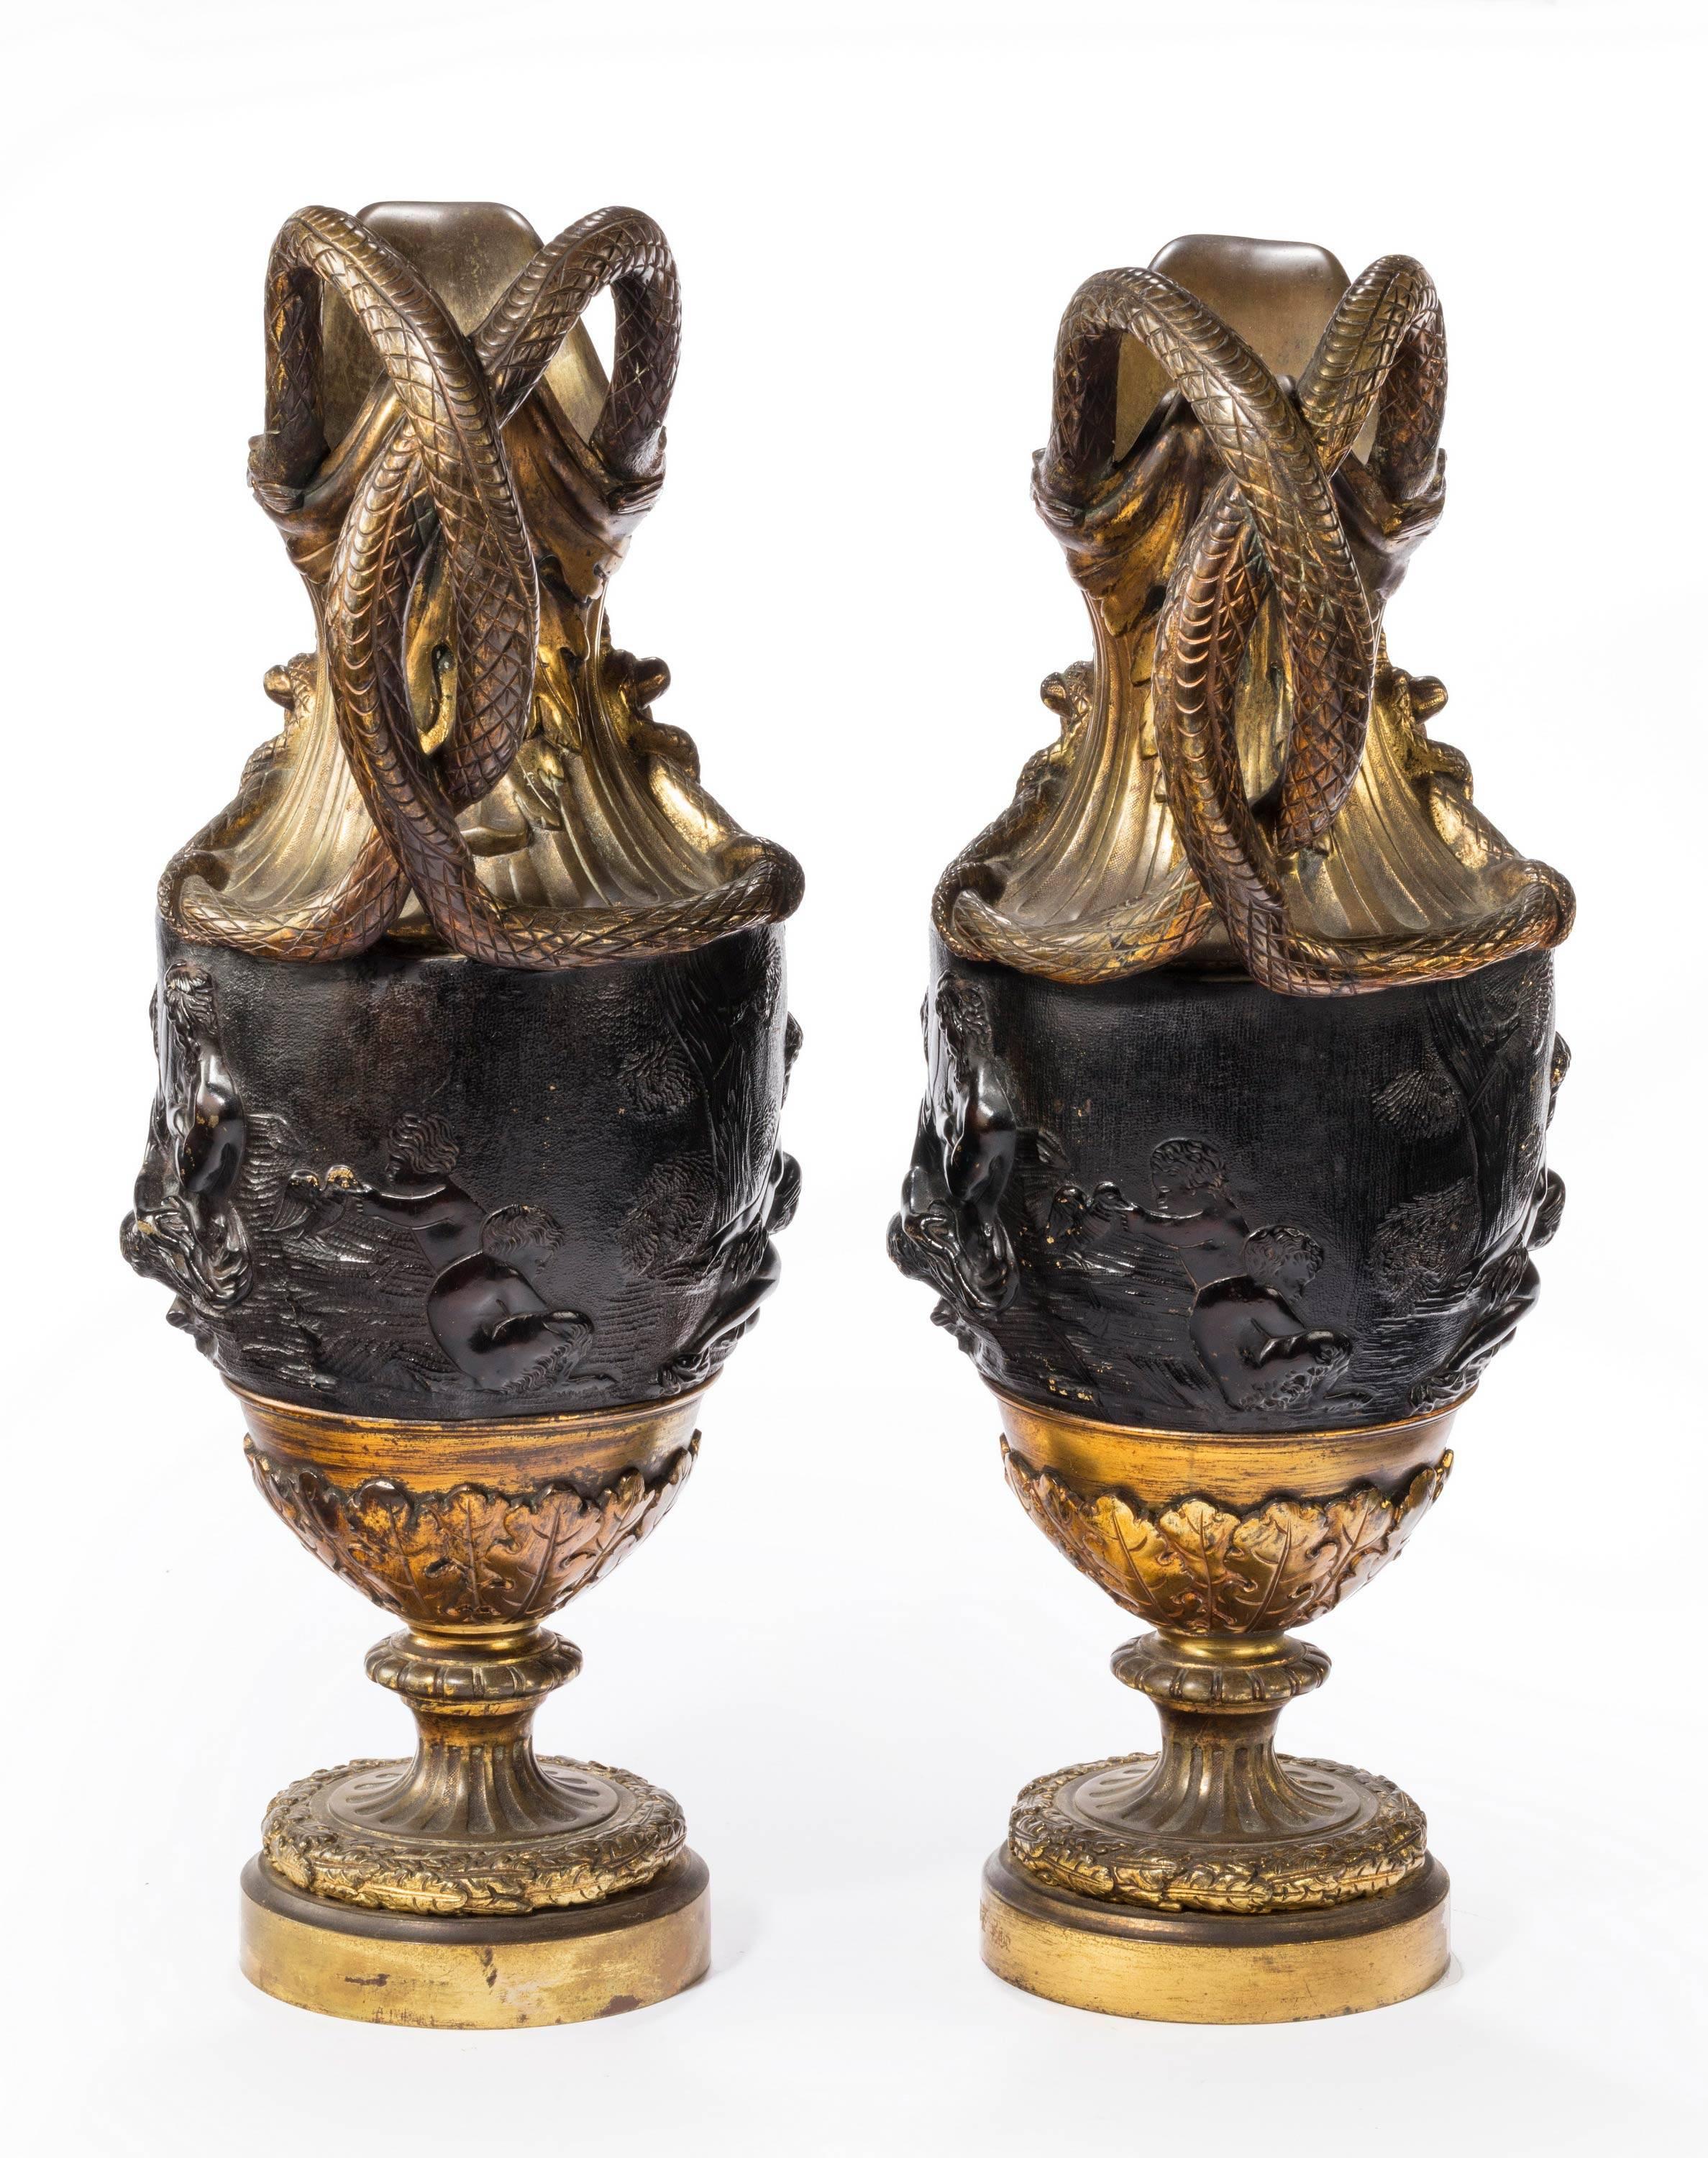 Pair of Late 18th Century, Bronze and Gilt Bronze Ewers in the Manner of Clodion 1